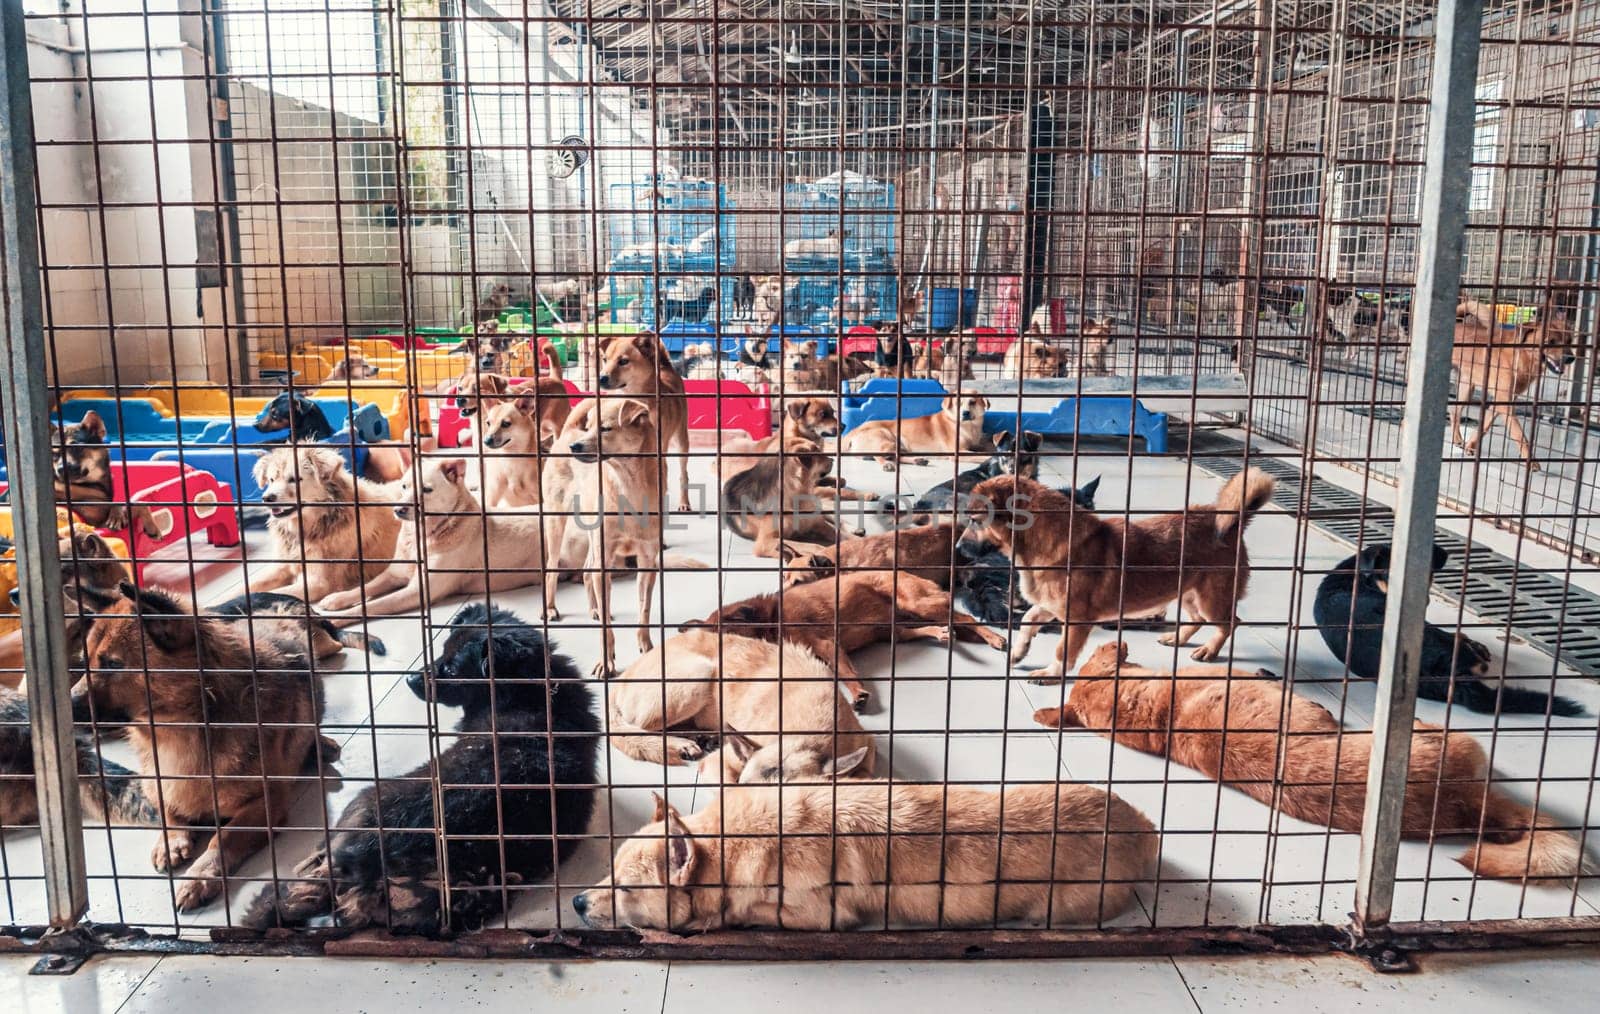 Sad dogs in shelter behind fence waiting to be rescued and adopted to new home. Shelter for animals concept